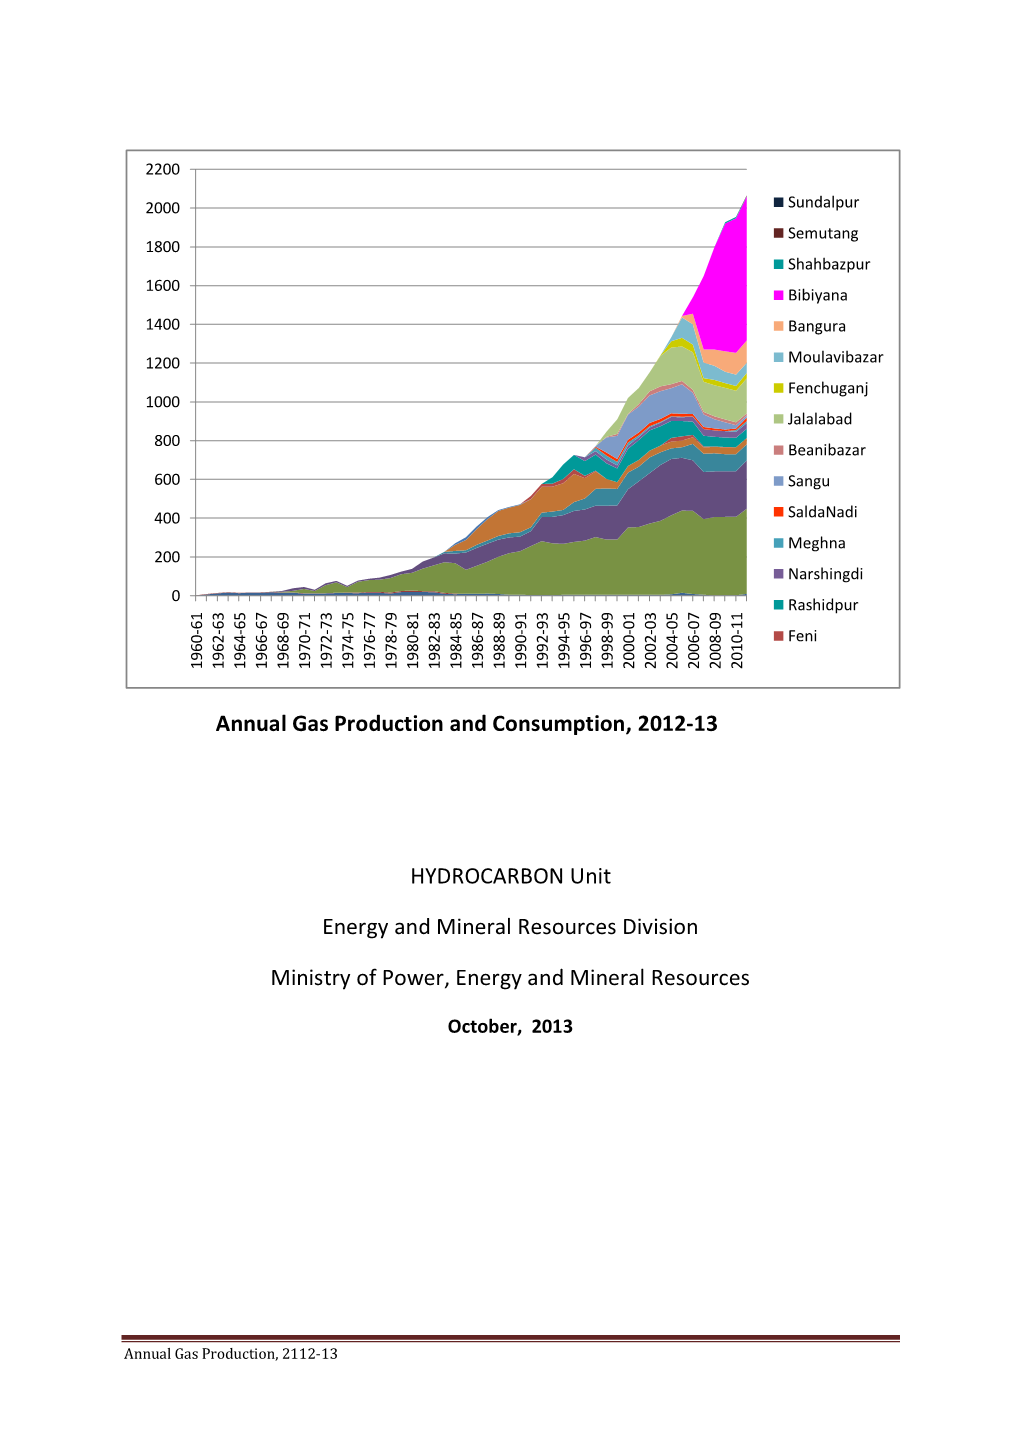 Annual Gas Production and Consumption, 2012-13